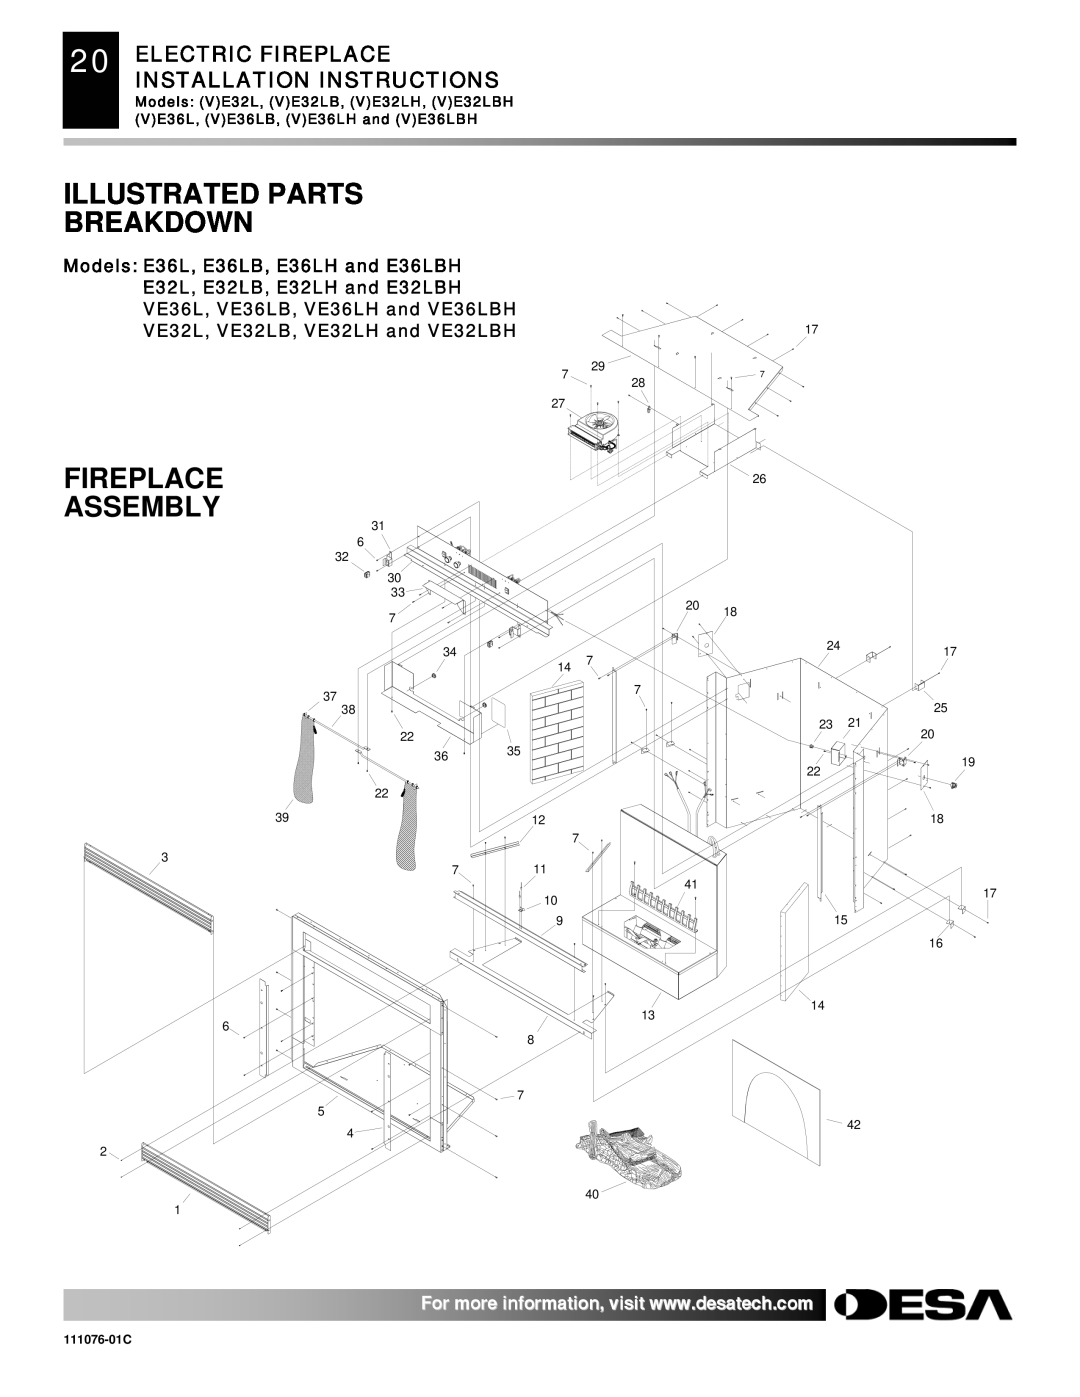 Desa E32, VE36, VE32 Illustrated Parts Breakdown, Assembly, Electric Fireplace Installation Instructions, 111076-01C 